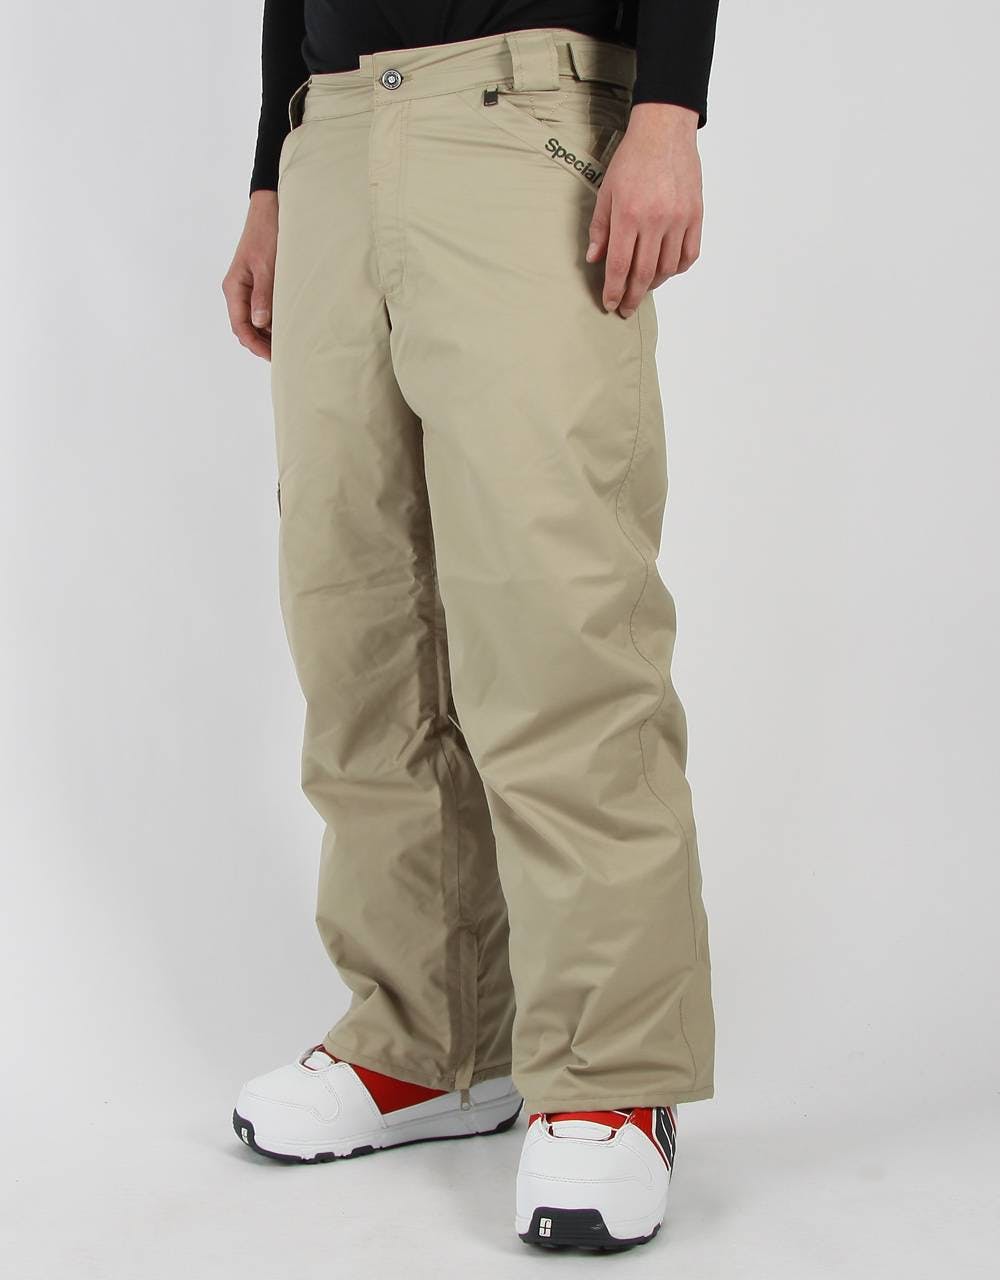 Special Blend Proof Snowboard Pants - Tan Lines